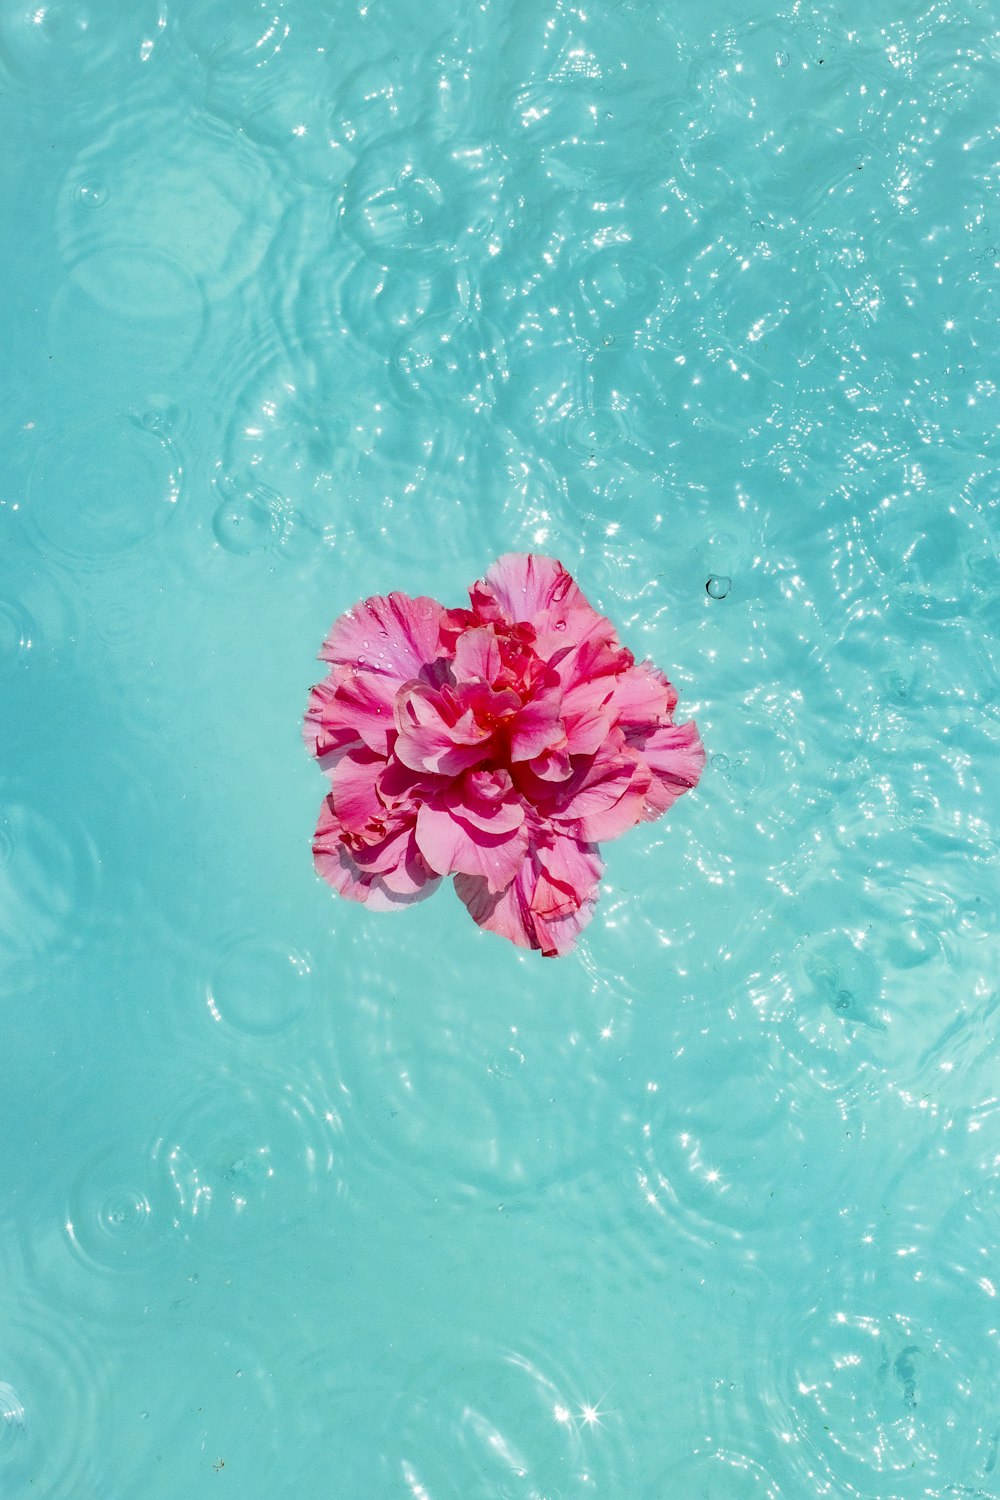 a pink flower in a pool